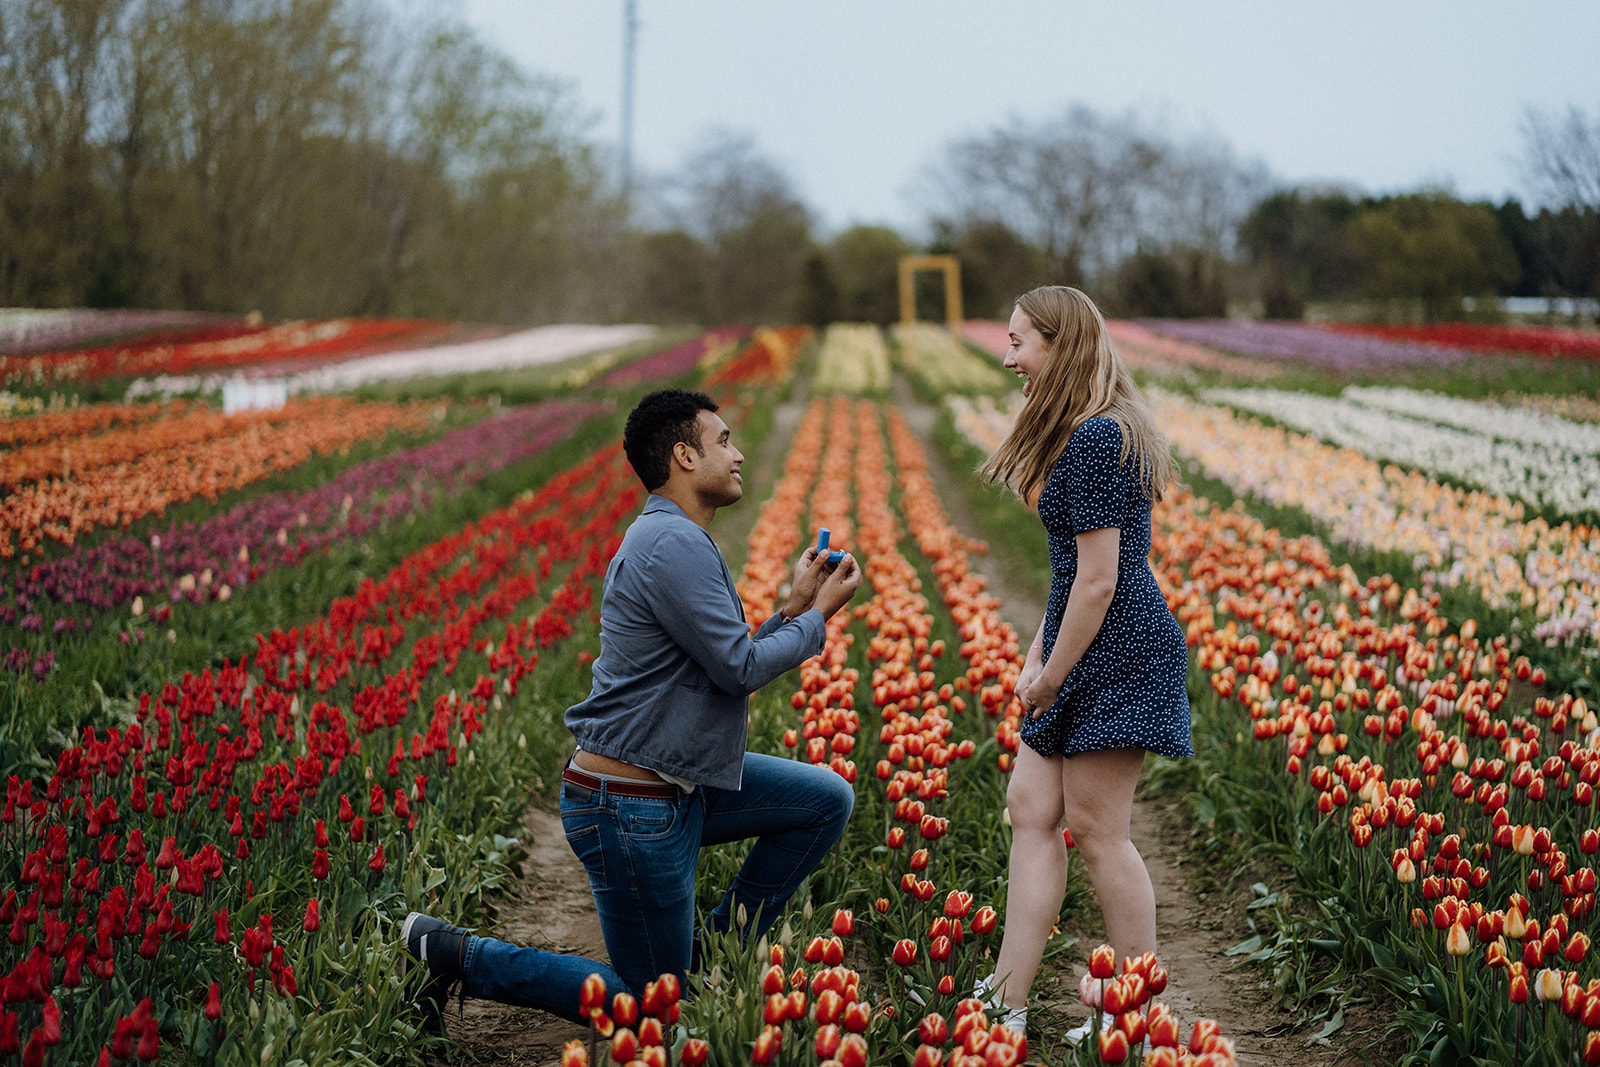 Man kneeling in tulips while his girlfriend turns around and smiles.